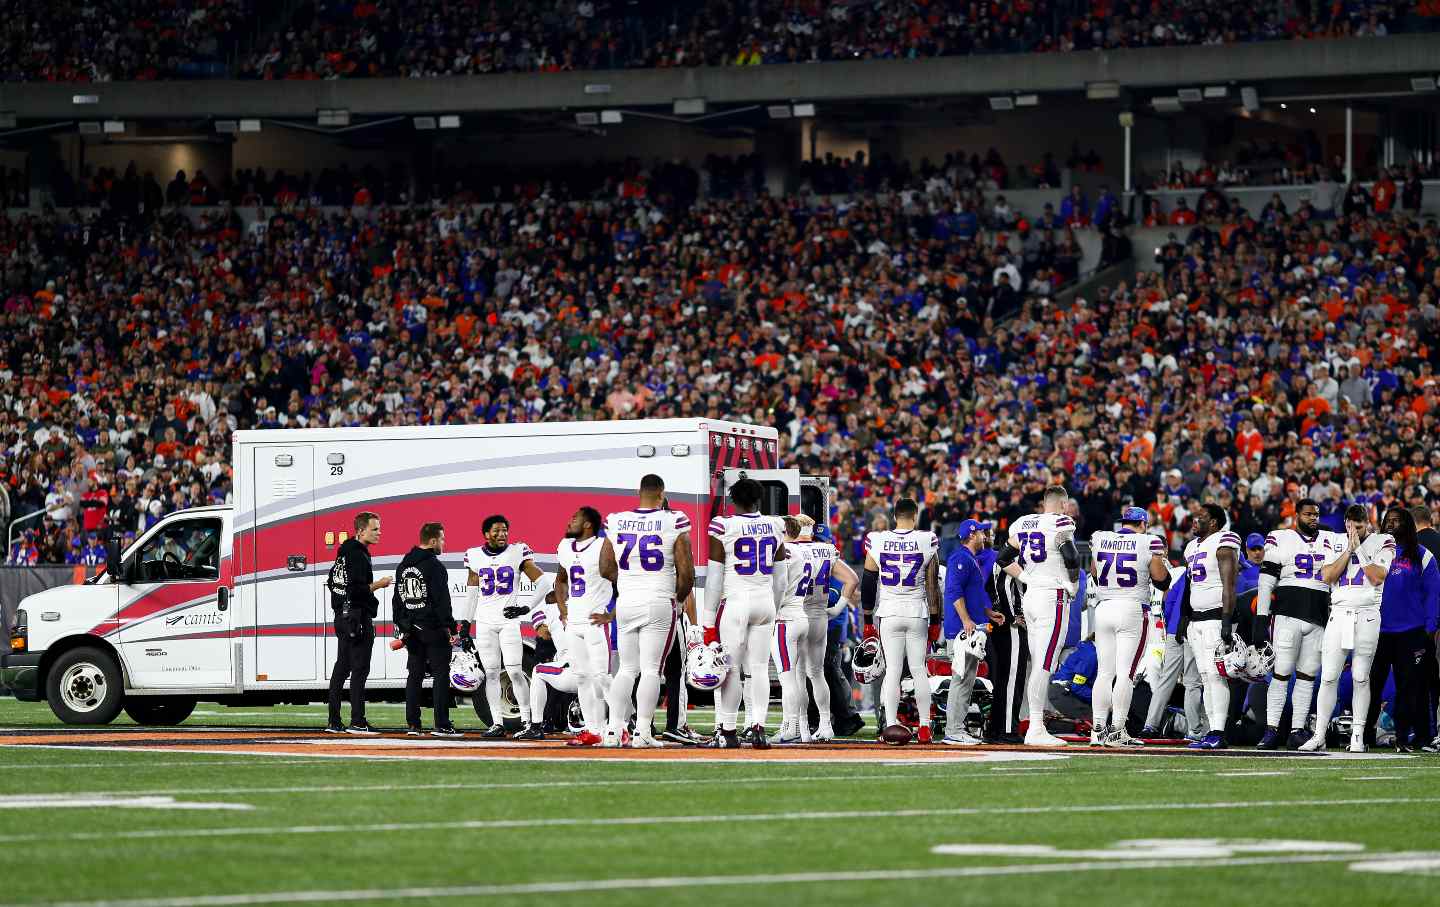 Buffalo Bills players react to an injury sustained by Damar Hamlin #3 with an ambulance on the field during the first quarter of an NFL football game against the Cincinnati Bengals at Paycor Stadium in Ohio.